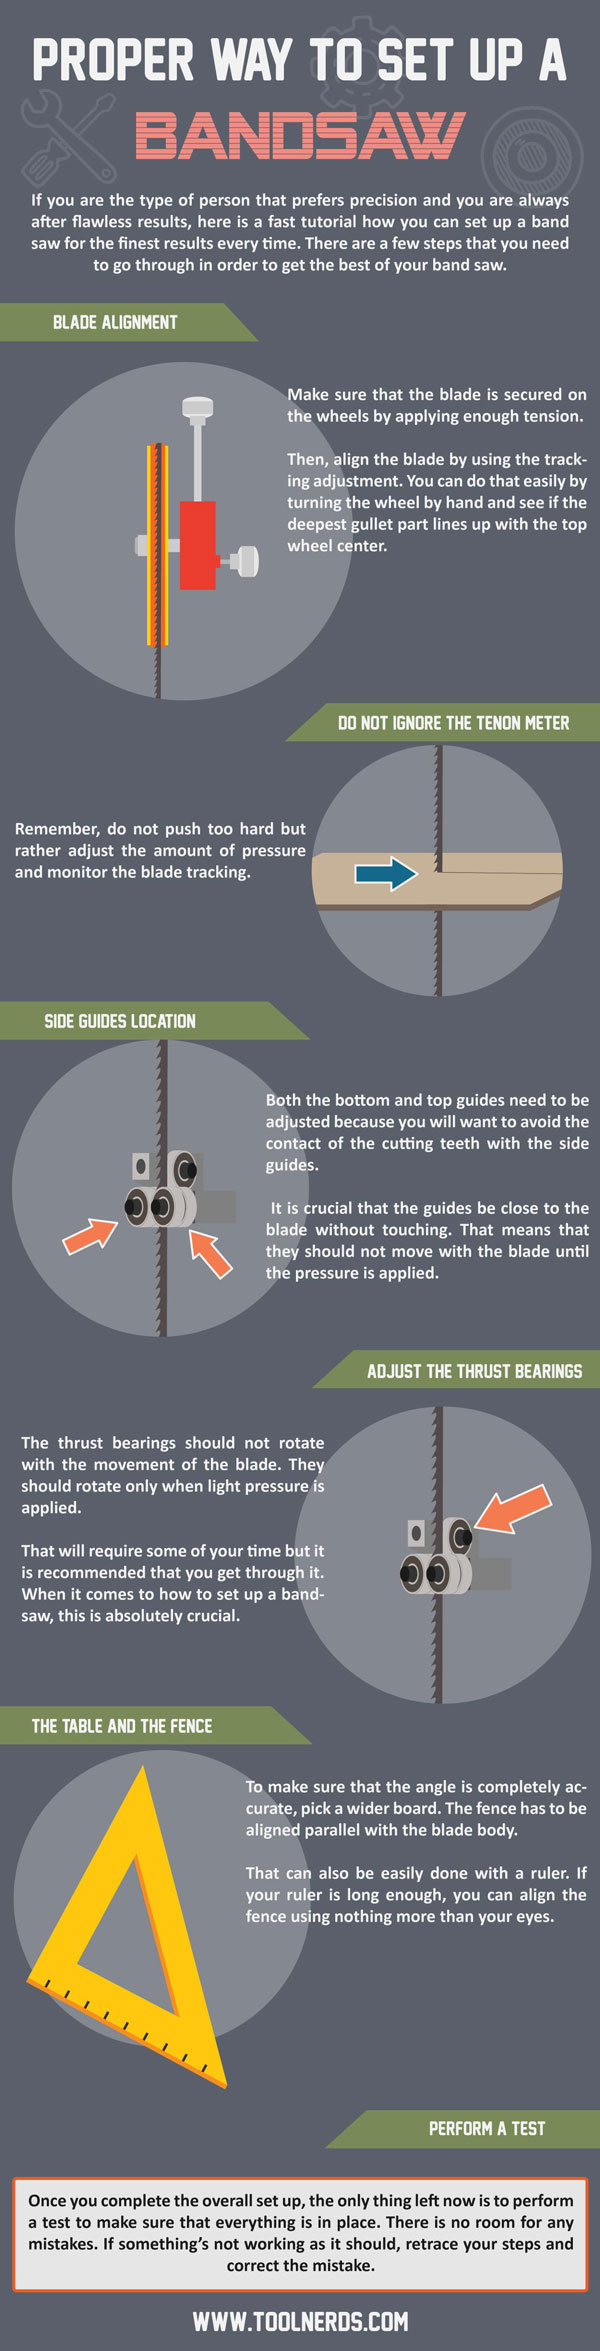 Proper Way to Set Up a Bandsaw Infographic